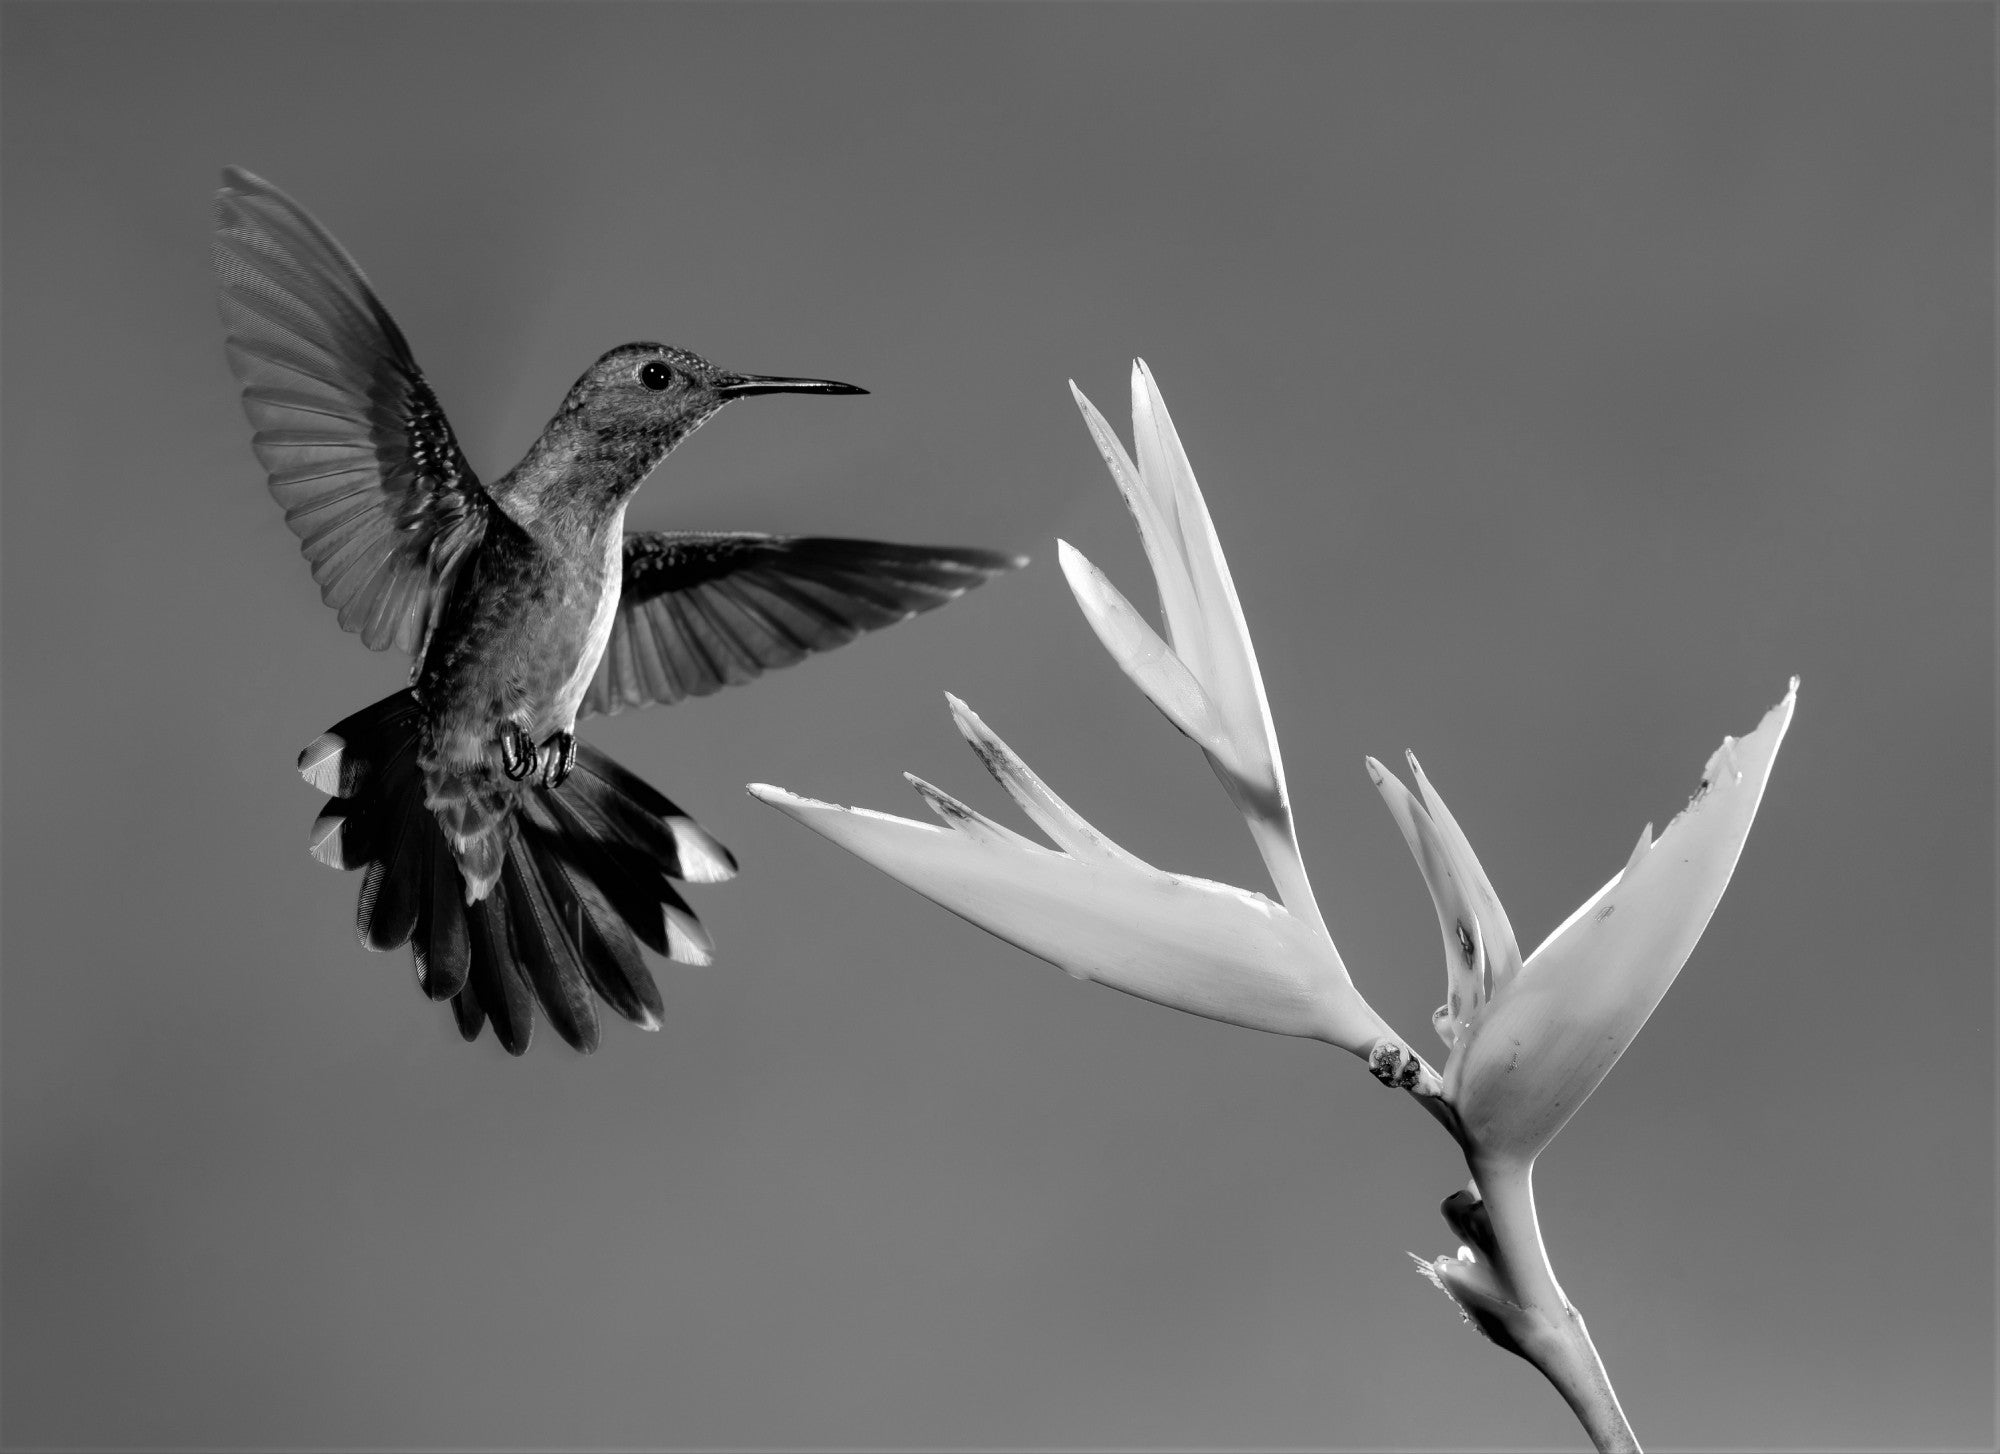 Black and white animal photography